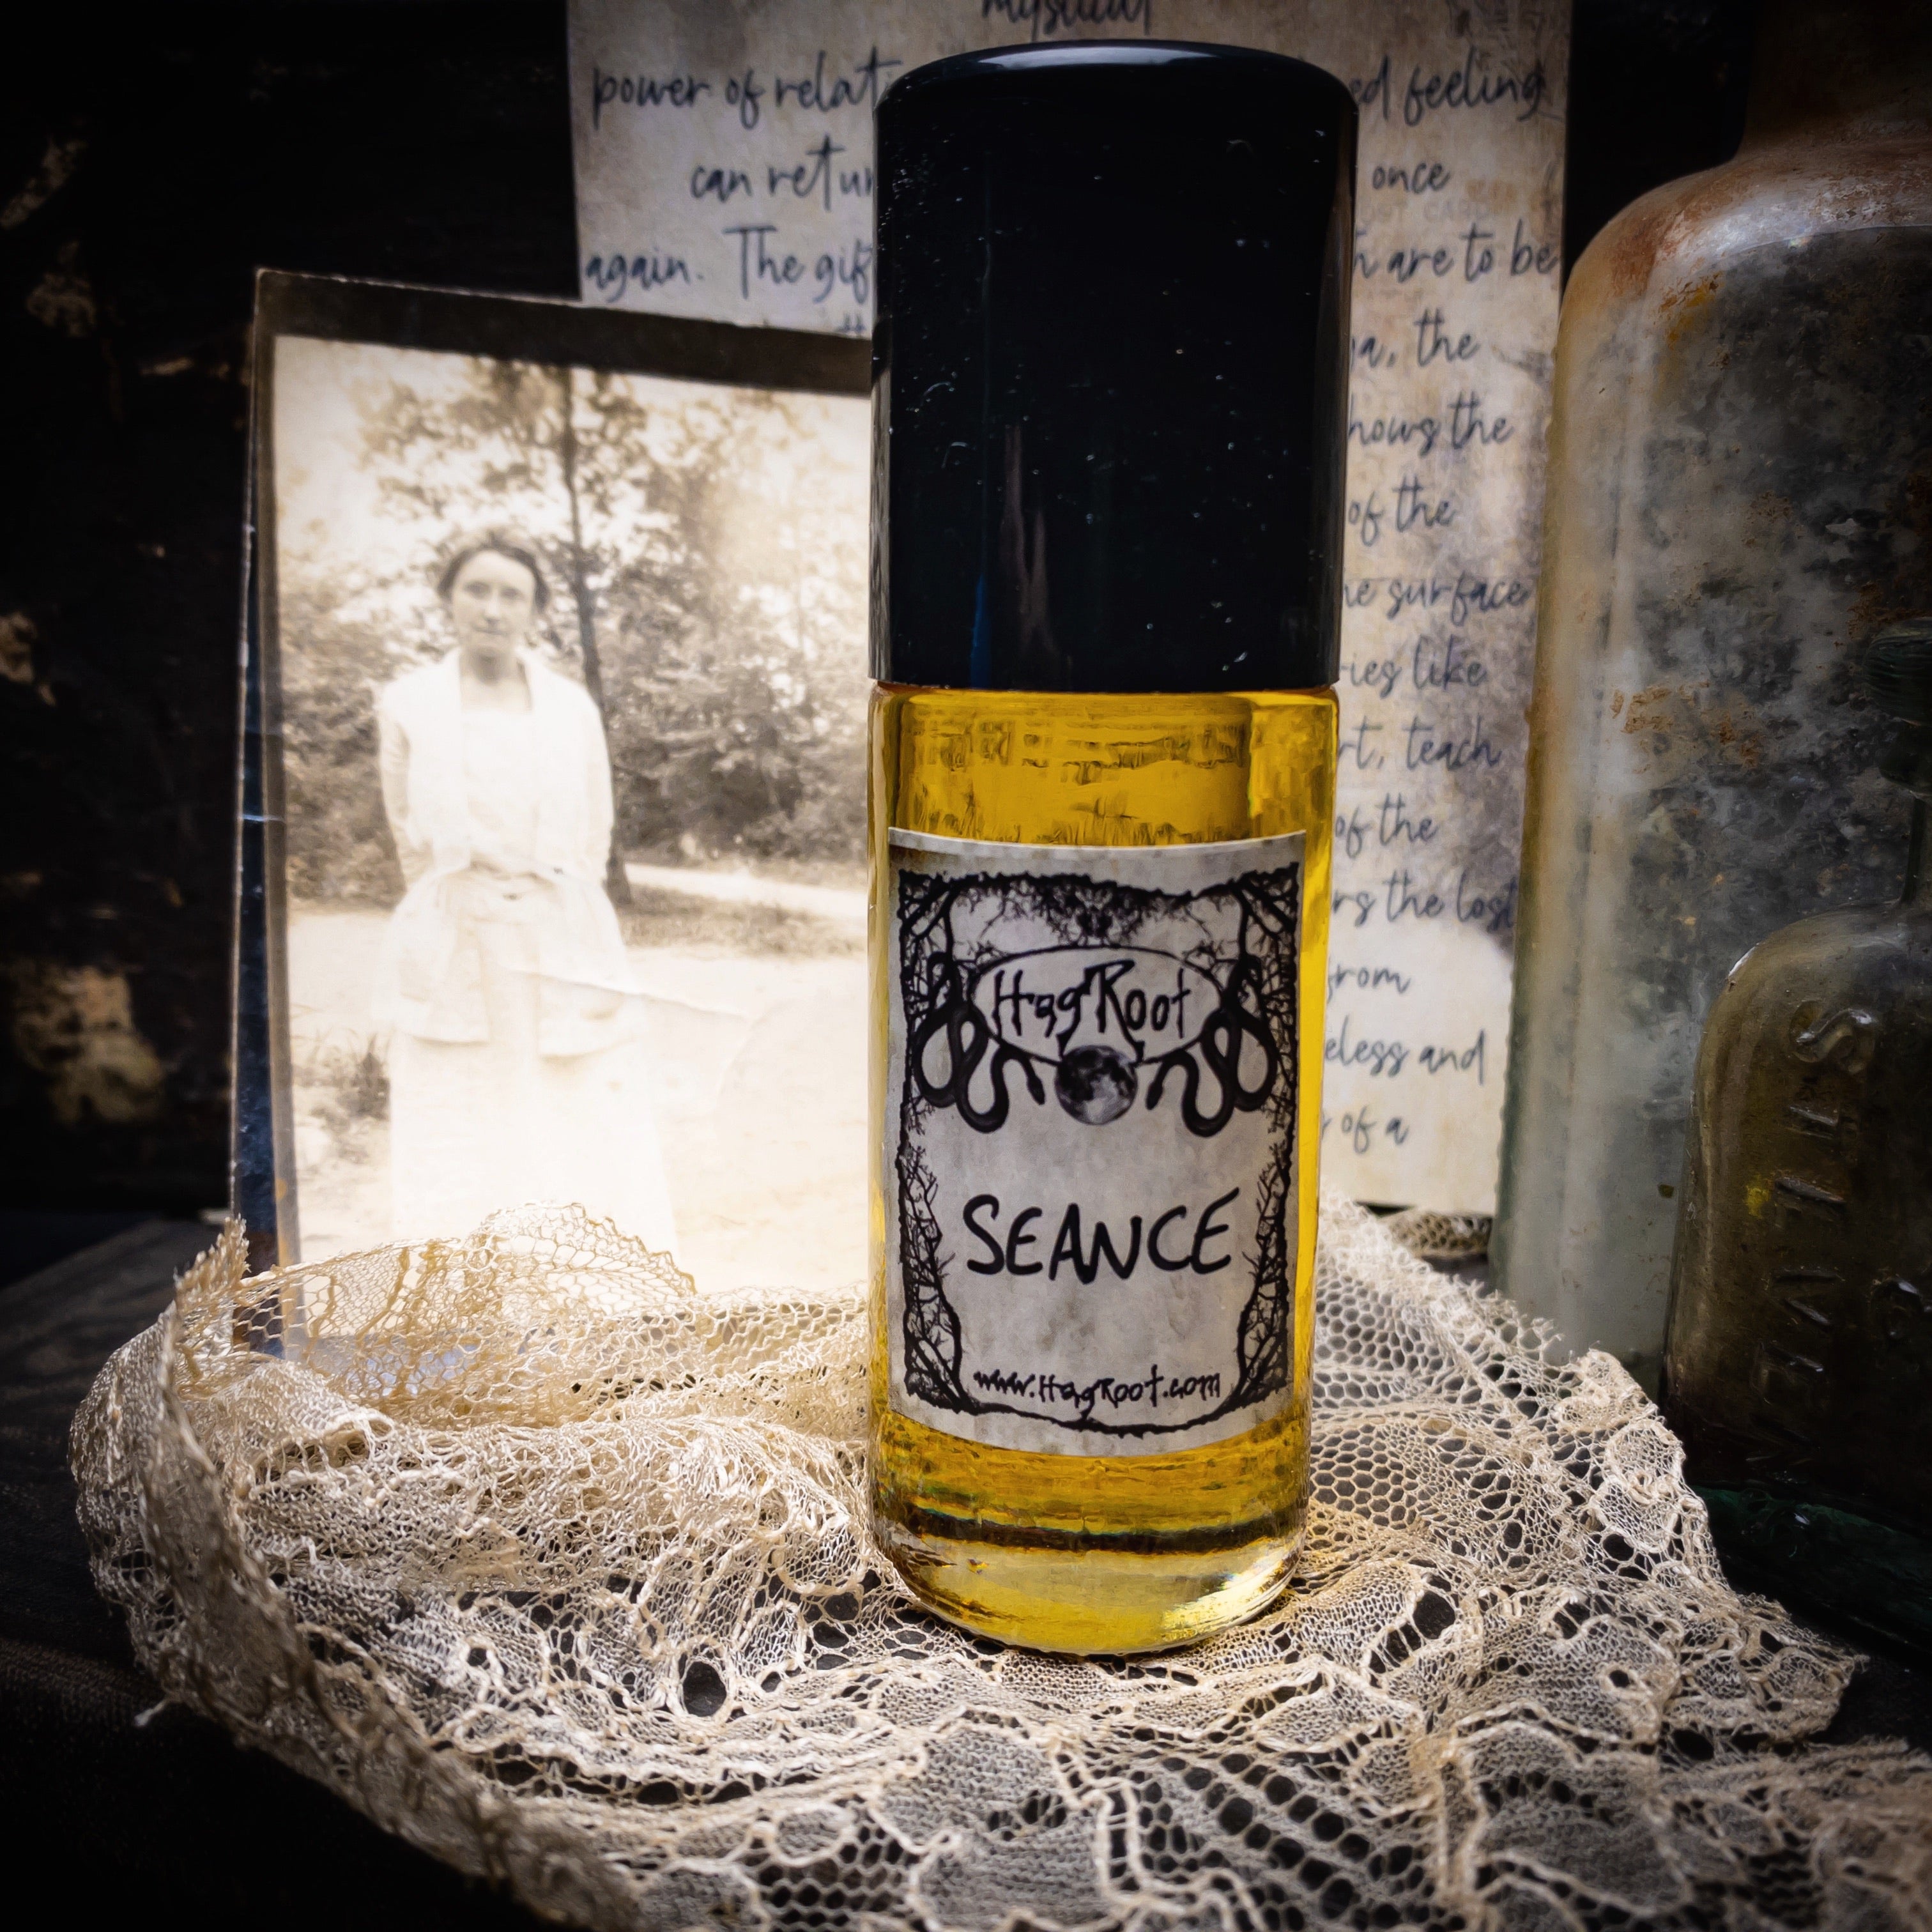 SÉANCE-(Incense, Old Books, Sweet Offerings, Coffee)-Perfume, Cologne, Anointing, Ritual Oil